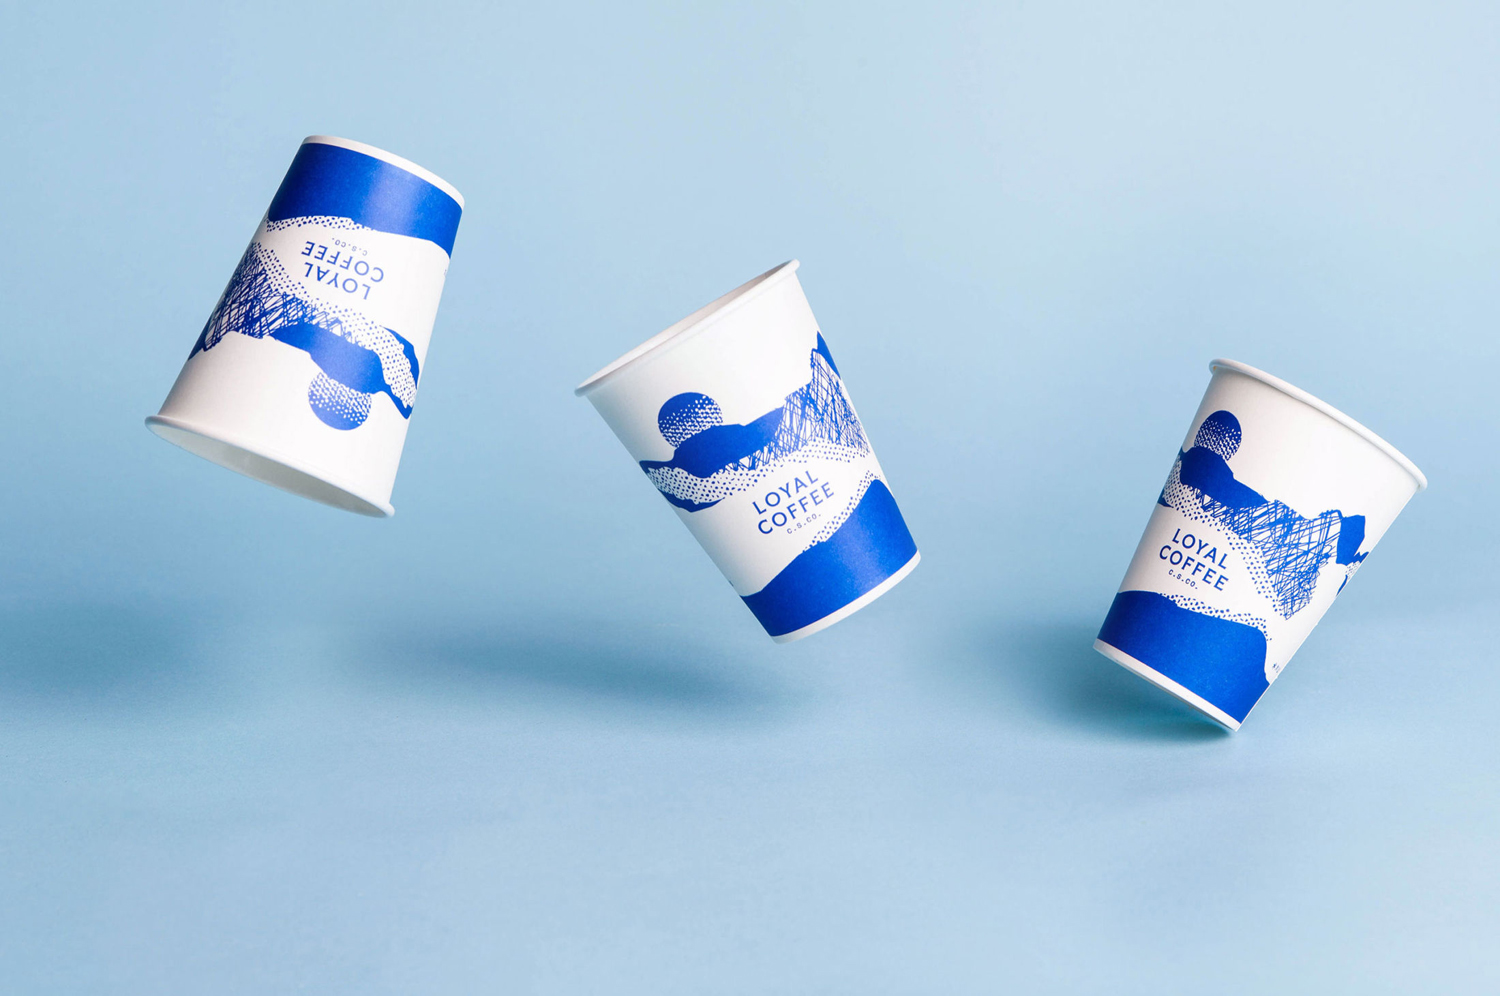 Coffee Cup Design – Loyal Coffee by Mast, United States